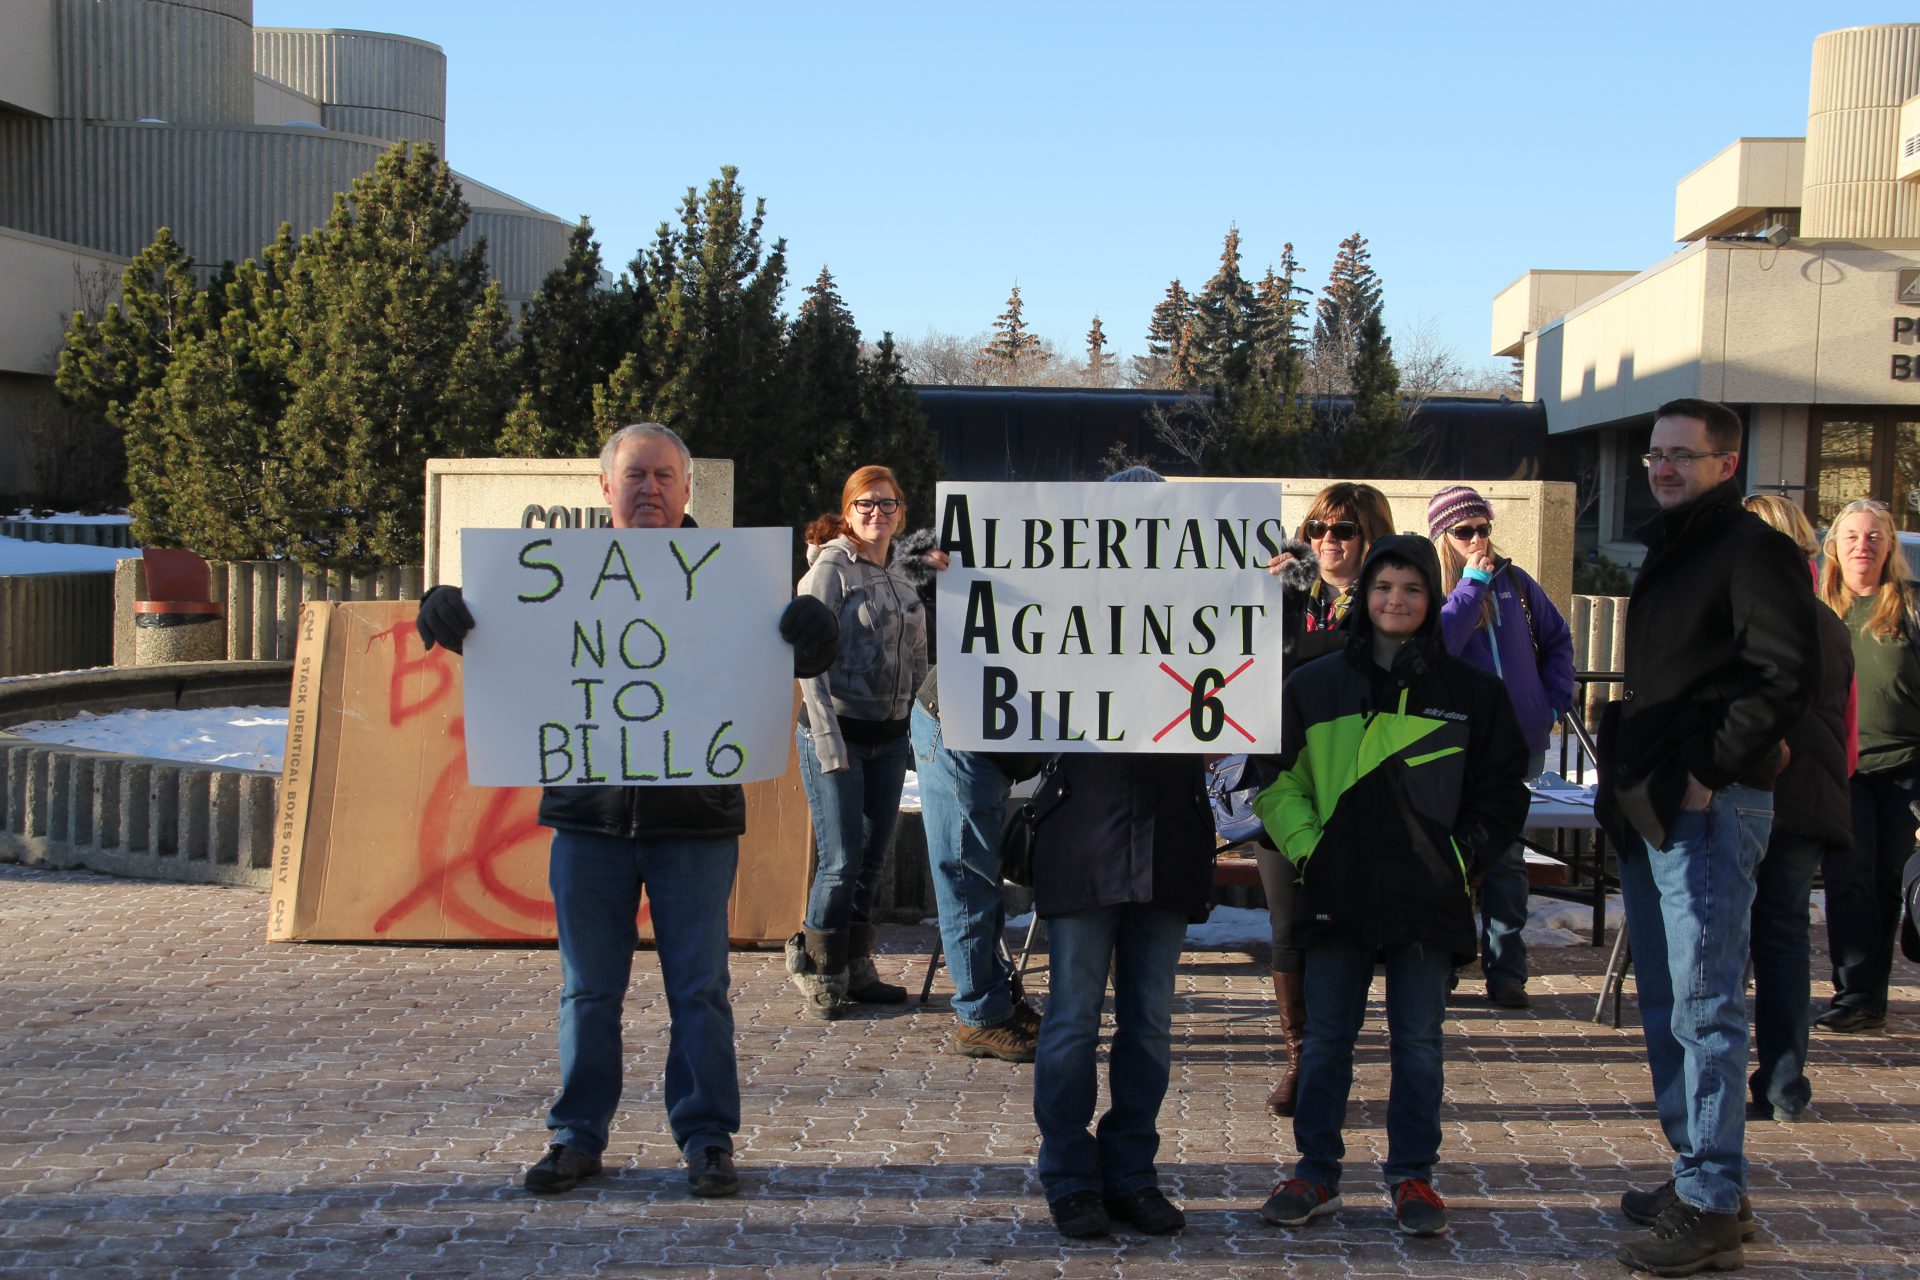 2015 Top Stories: Farmers and ranchers protest Bill 6